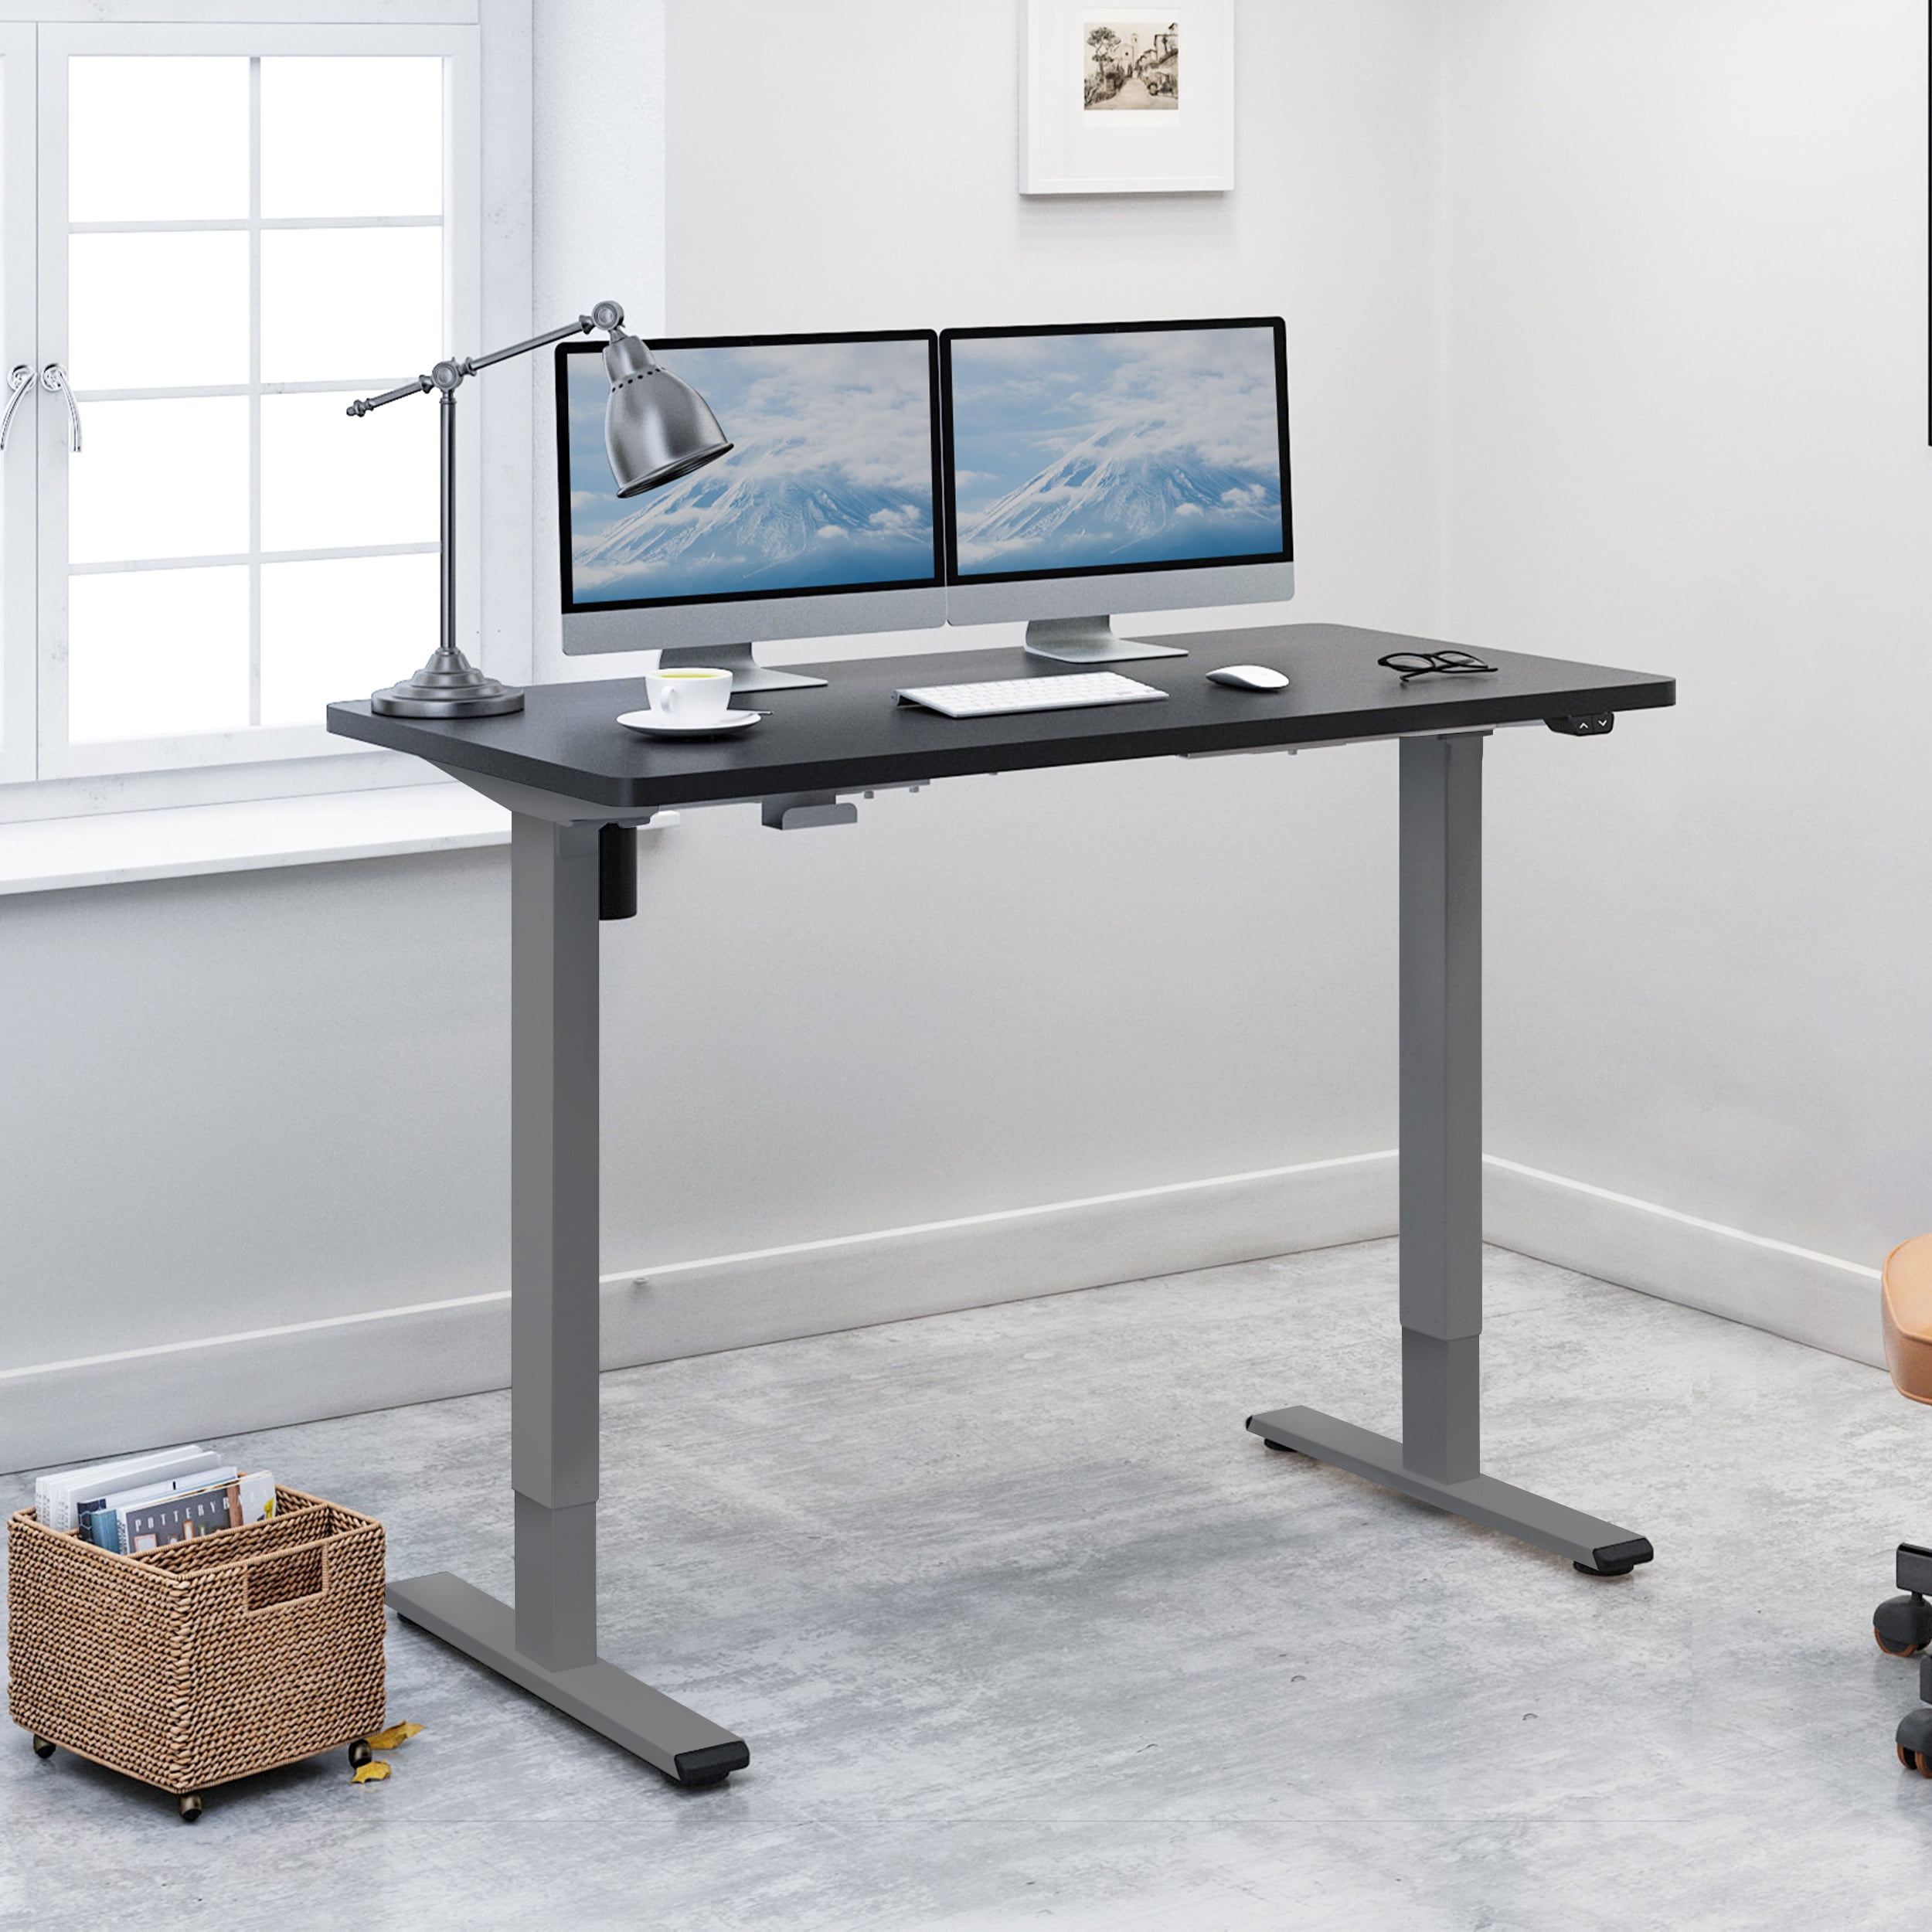 FLEXISPOT Standing Desk Height Adjustable Desk Electric Sit Stand Desk Home  Office Table (55x28 Black+Maple 2 Packages)